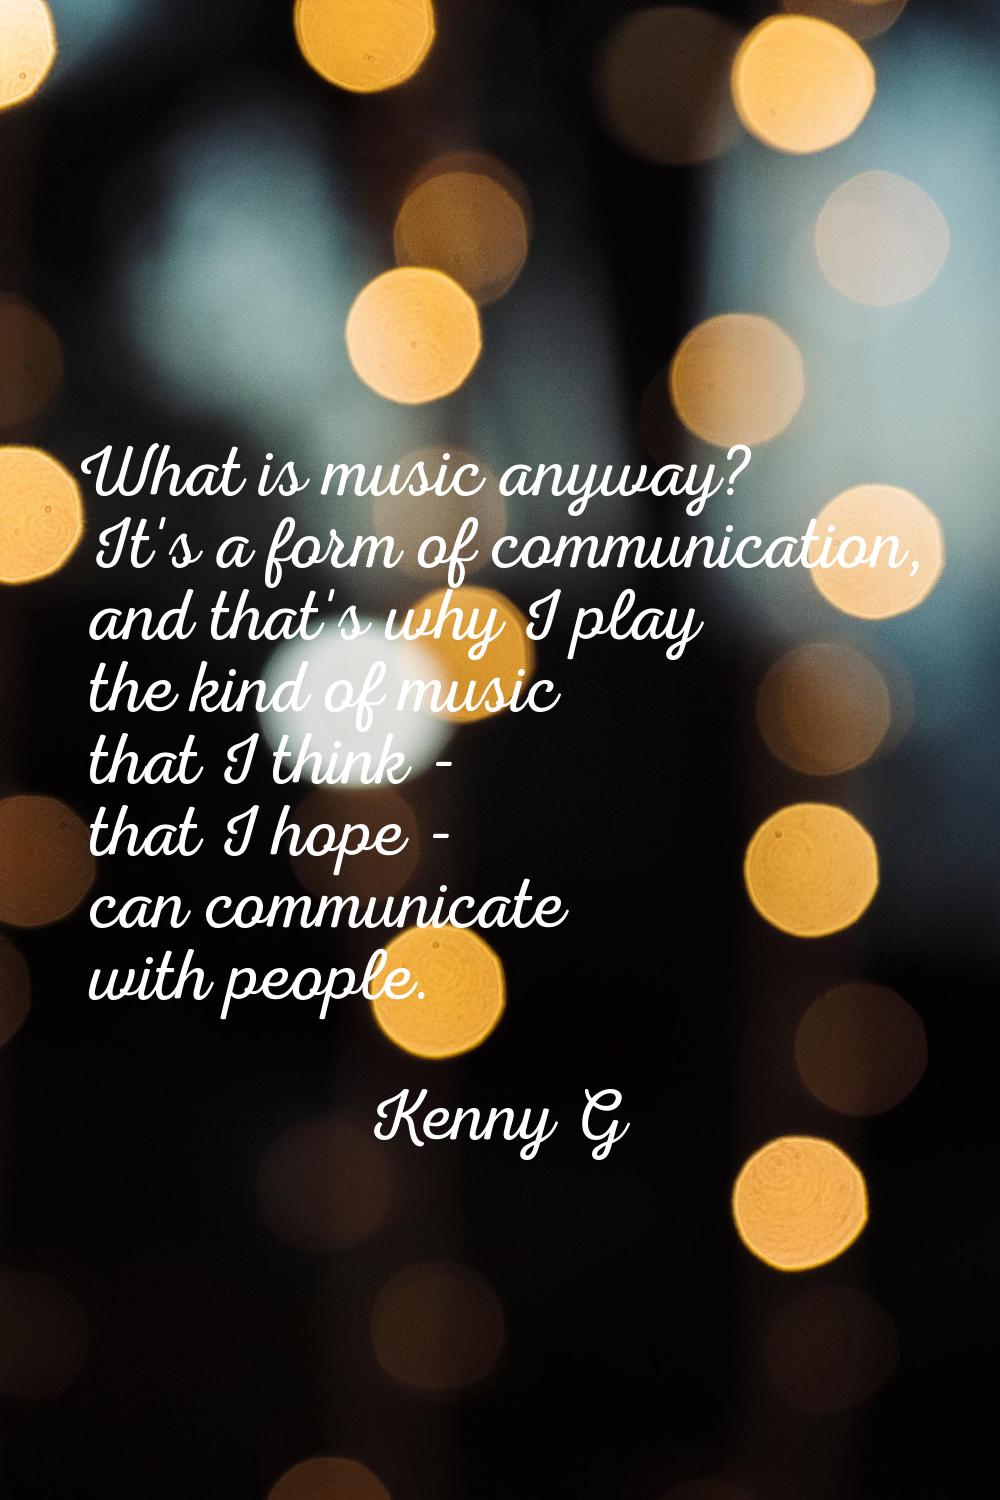 What is music anyway? It's a form of communication, and that's why I play the kind of music that I 